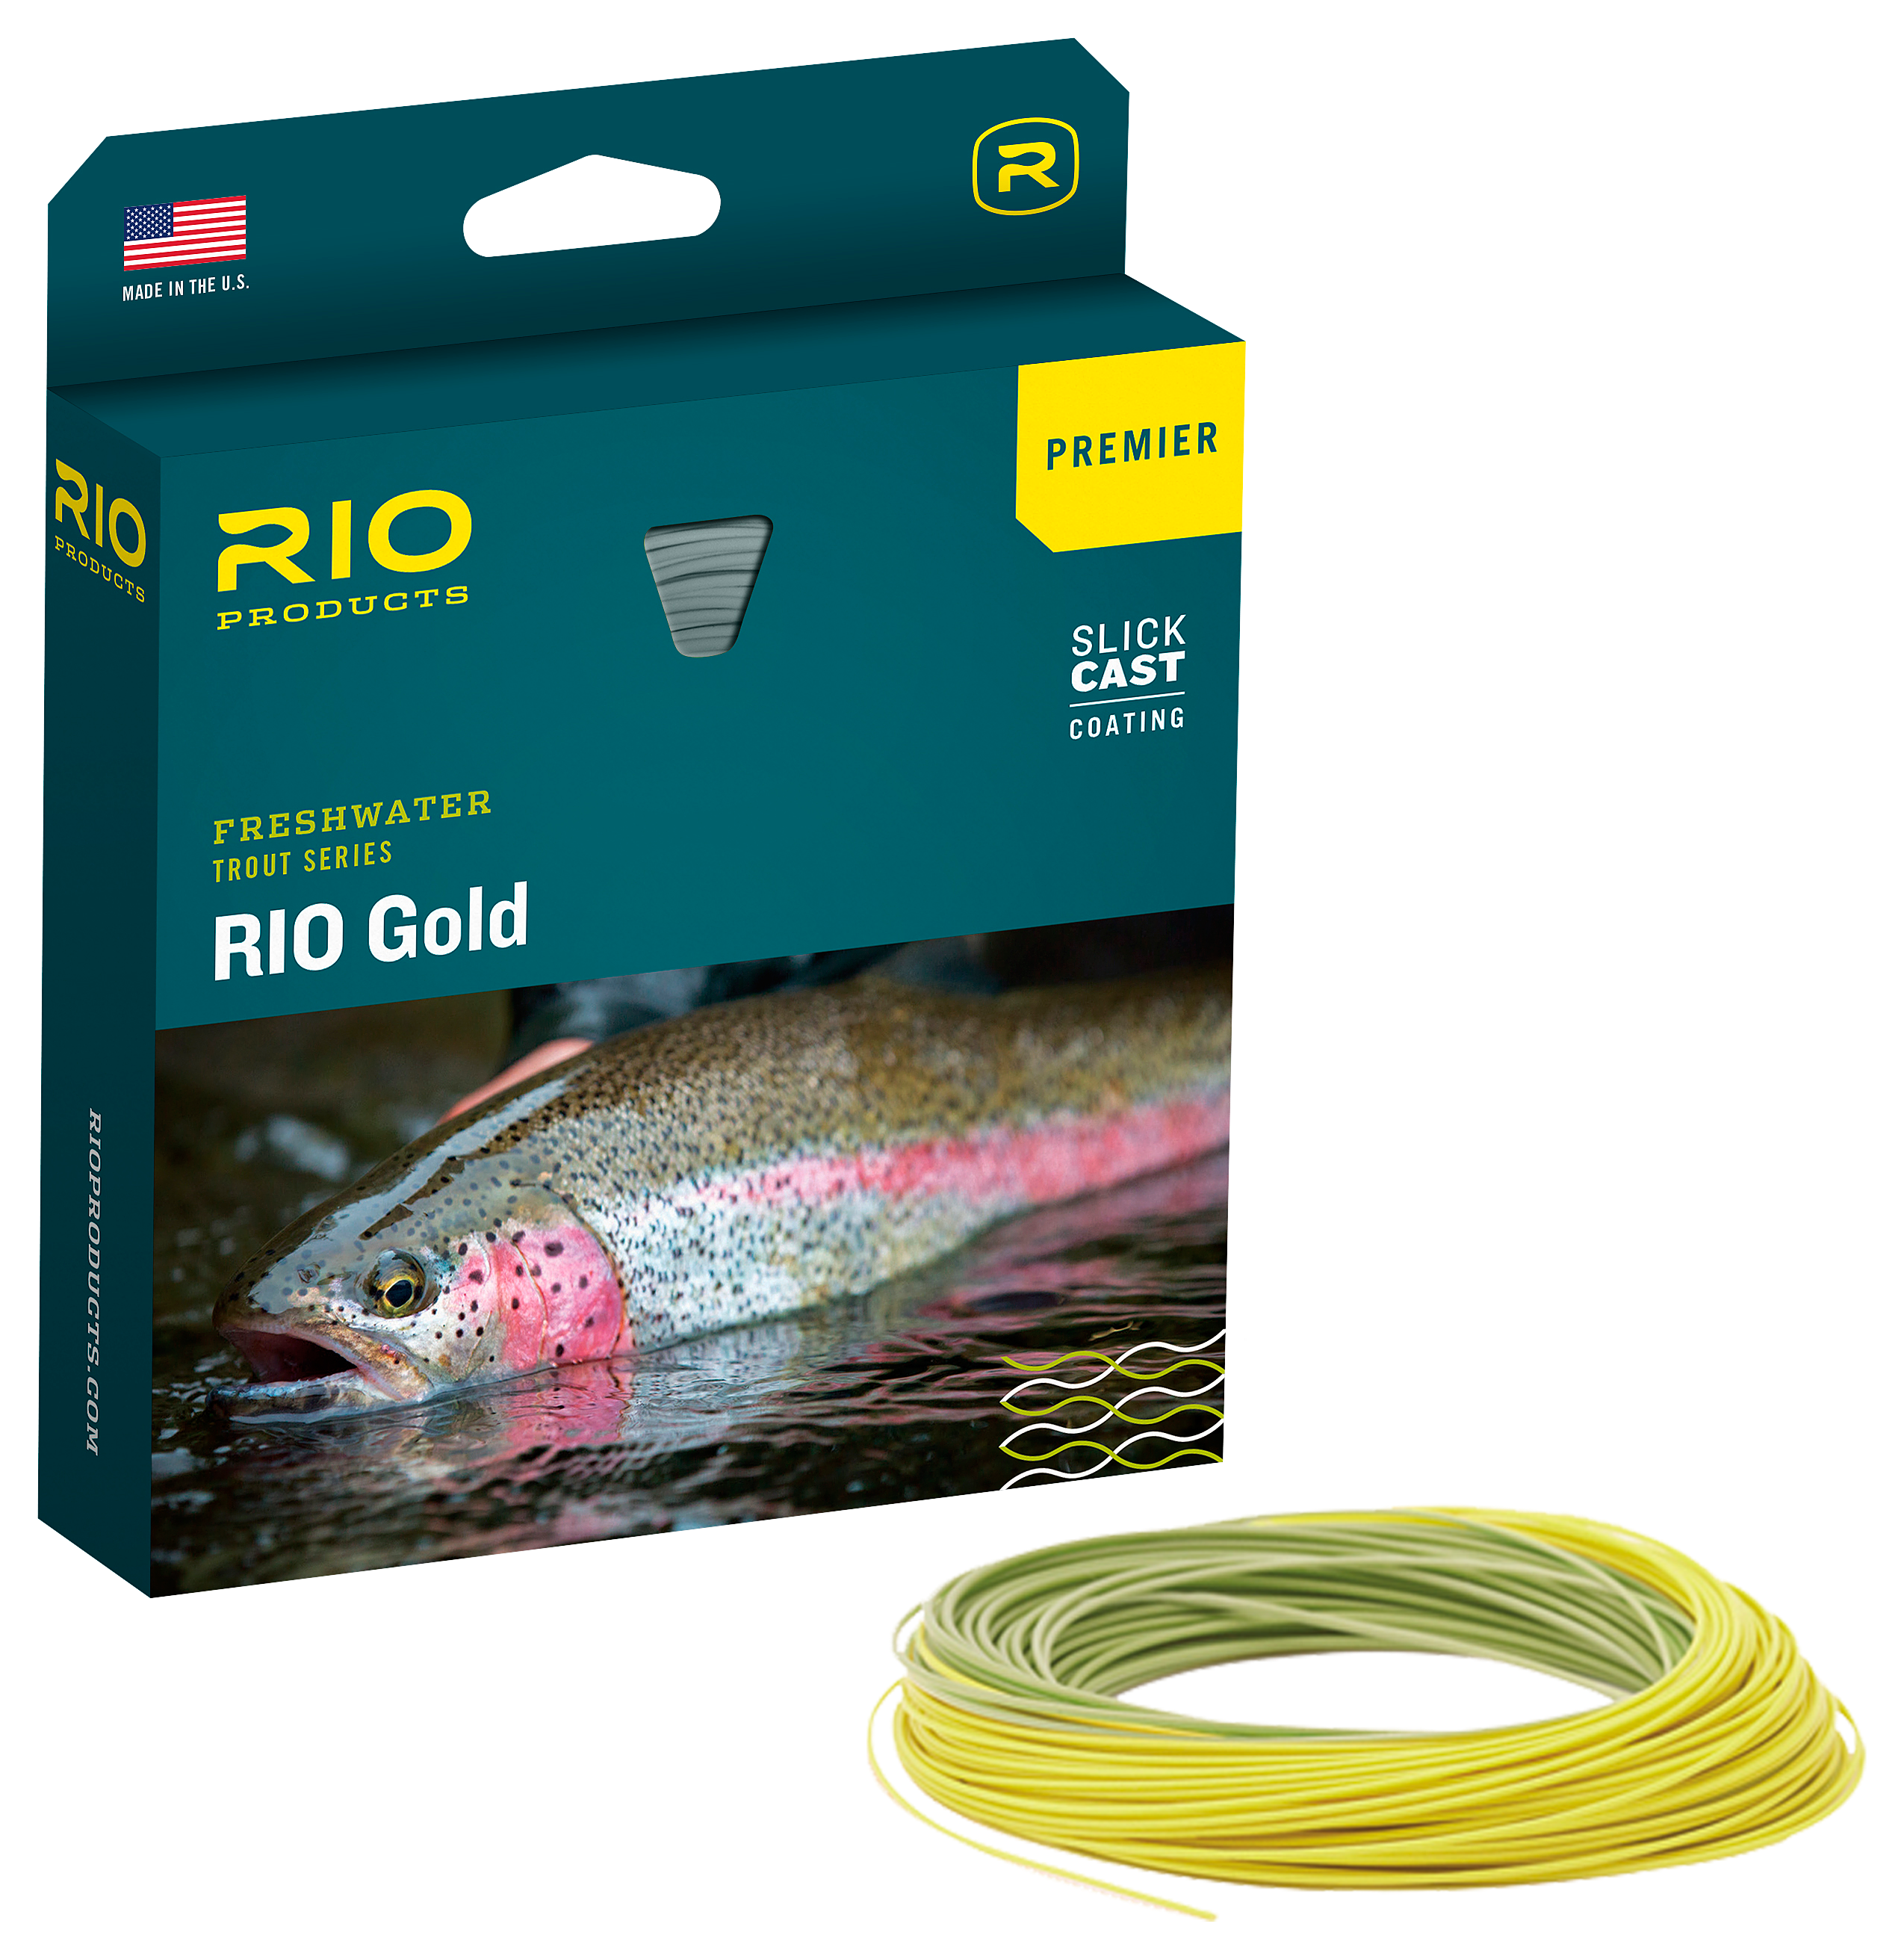 RIO Premier RIO Gold Fly Line - Moss/Gold - 90' - 7 Wt.